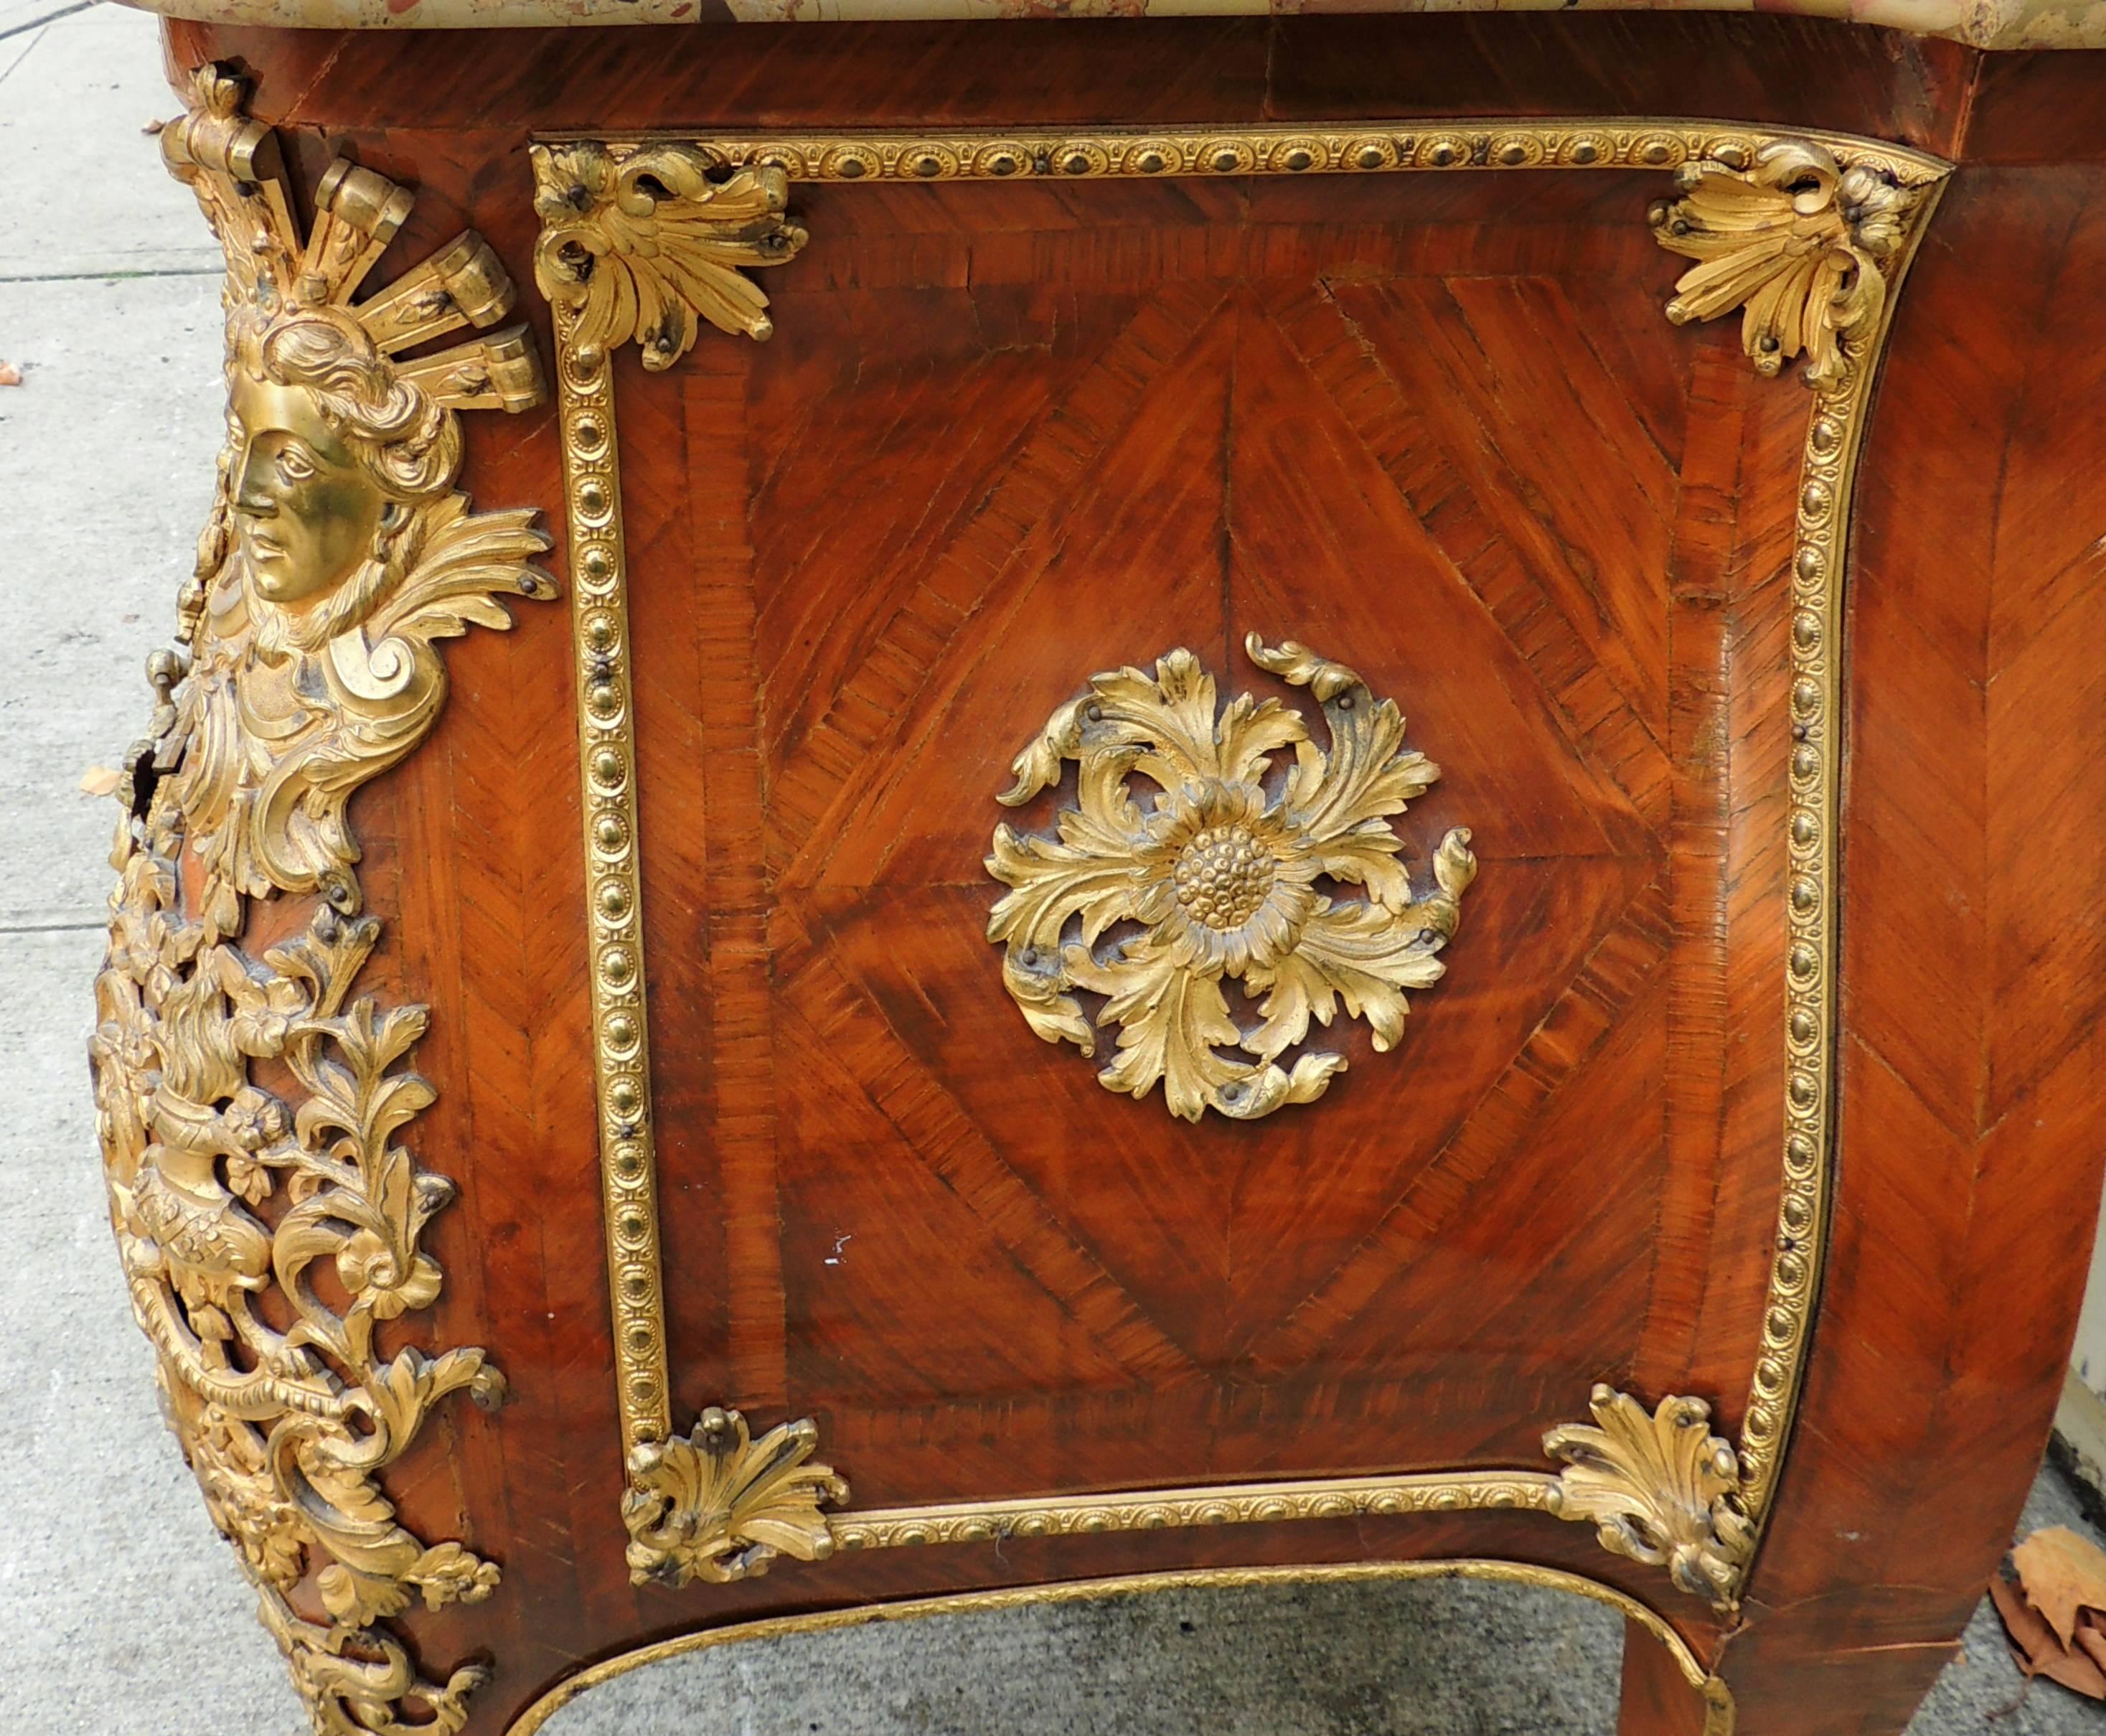 Wonderful French 19th Century Louis XV Ormolu Bronze-Mounted Marble-Top Commode For Sale 2